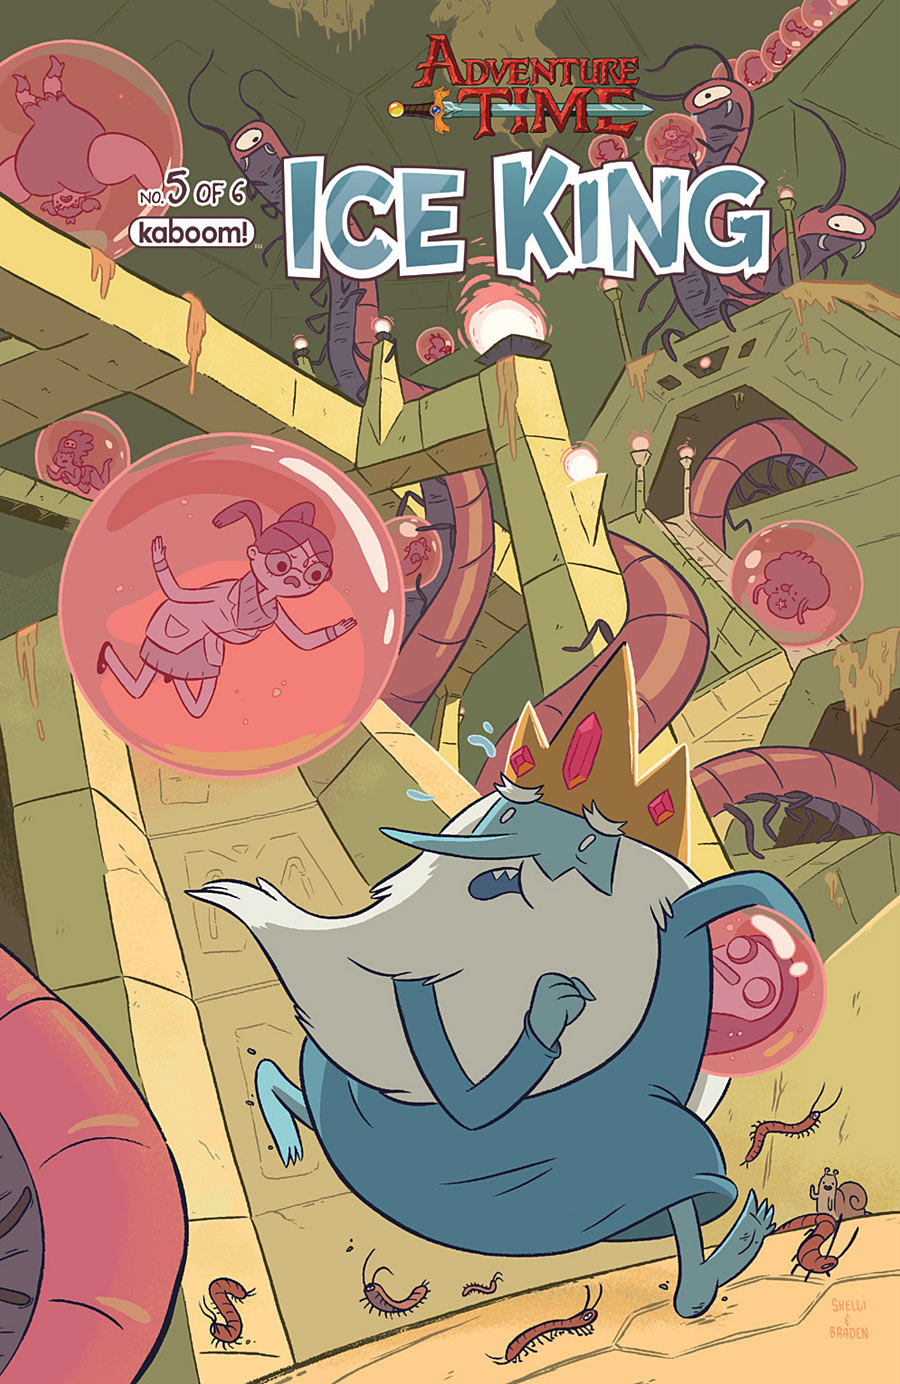 Adventure Time Ice King Issue 5 Adventure Time Wiki